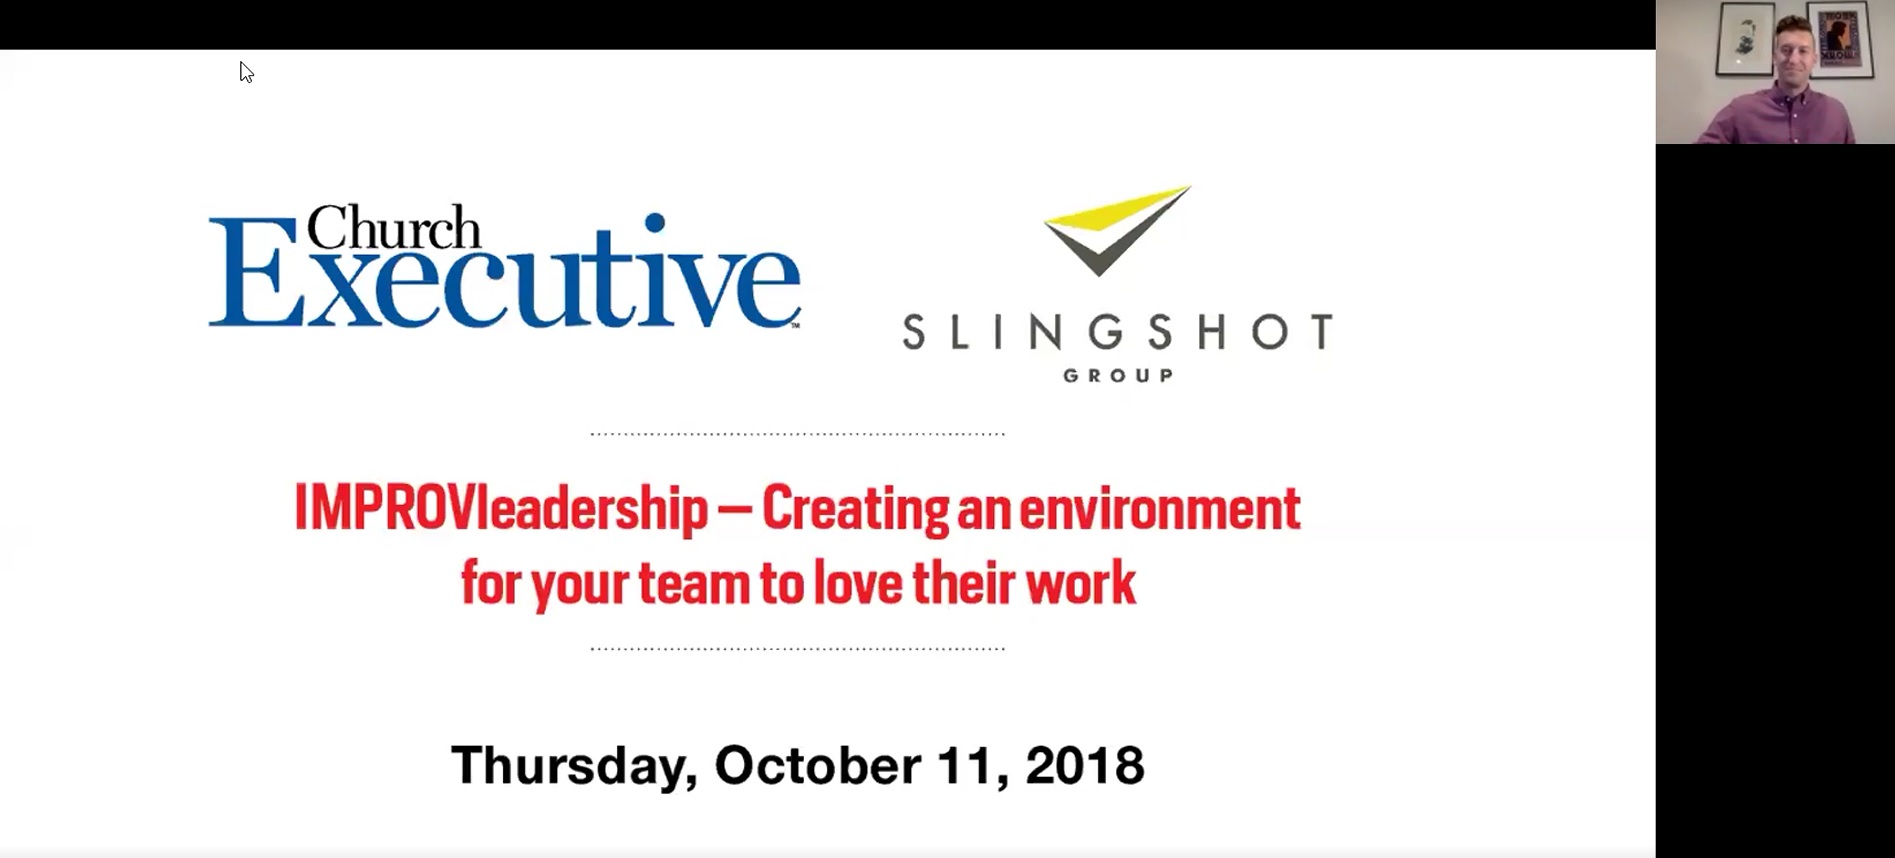 IMPROVleadership -- Creating an environment for your team to love their work